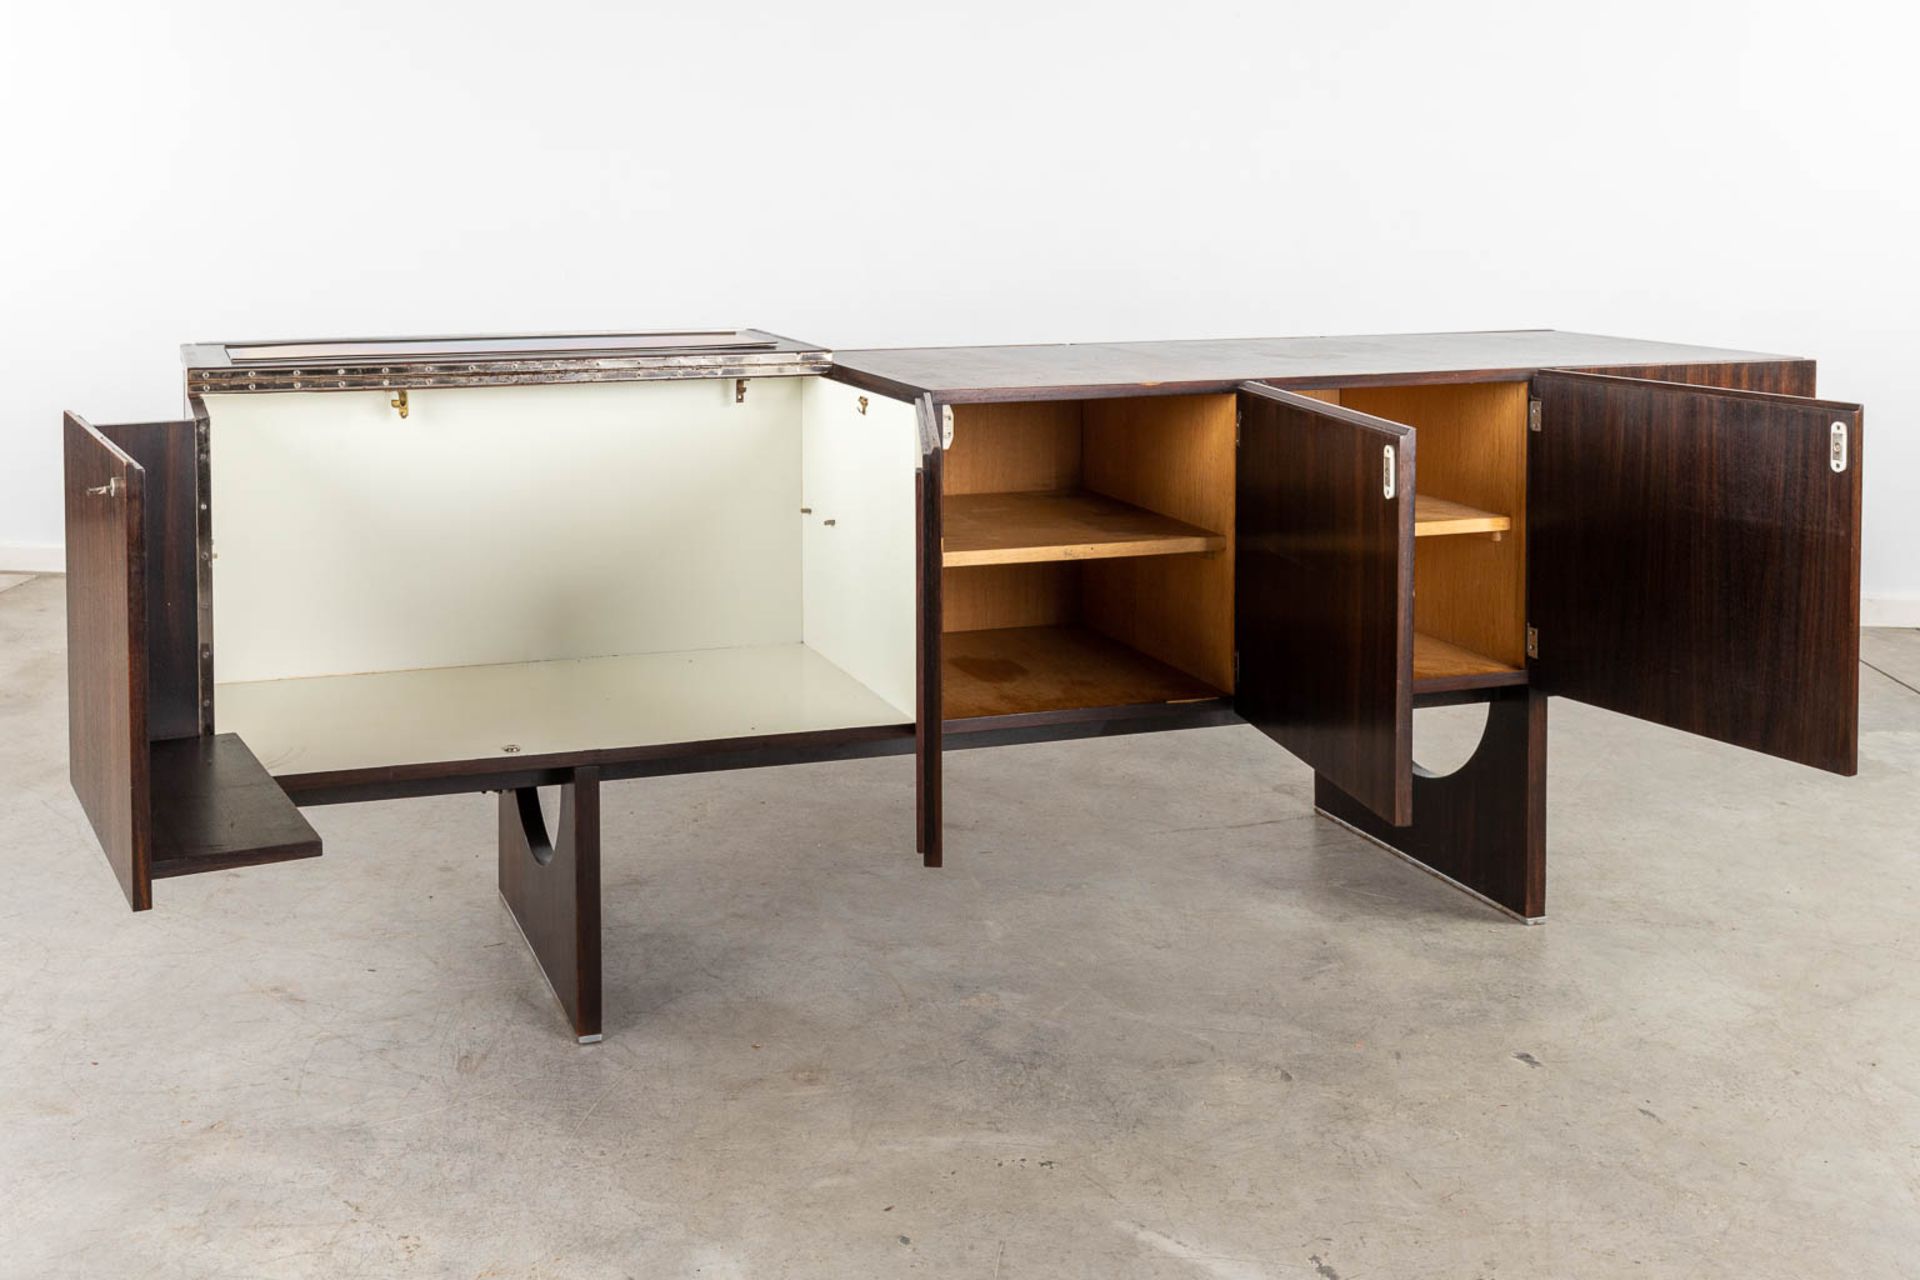 A mid-century sideboard with rosewood veneer, probably made by Decoene. (D:56 x W:225 x H:78 cm) - Image 3 of 19